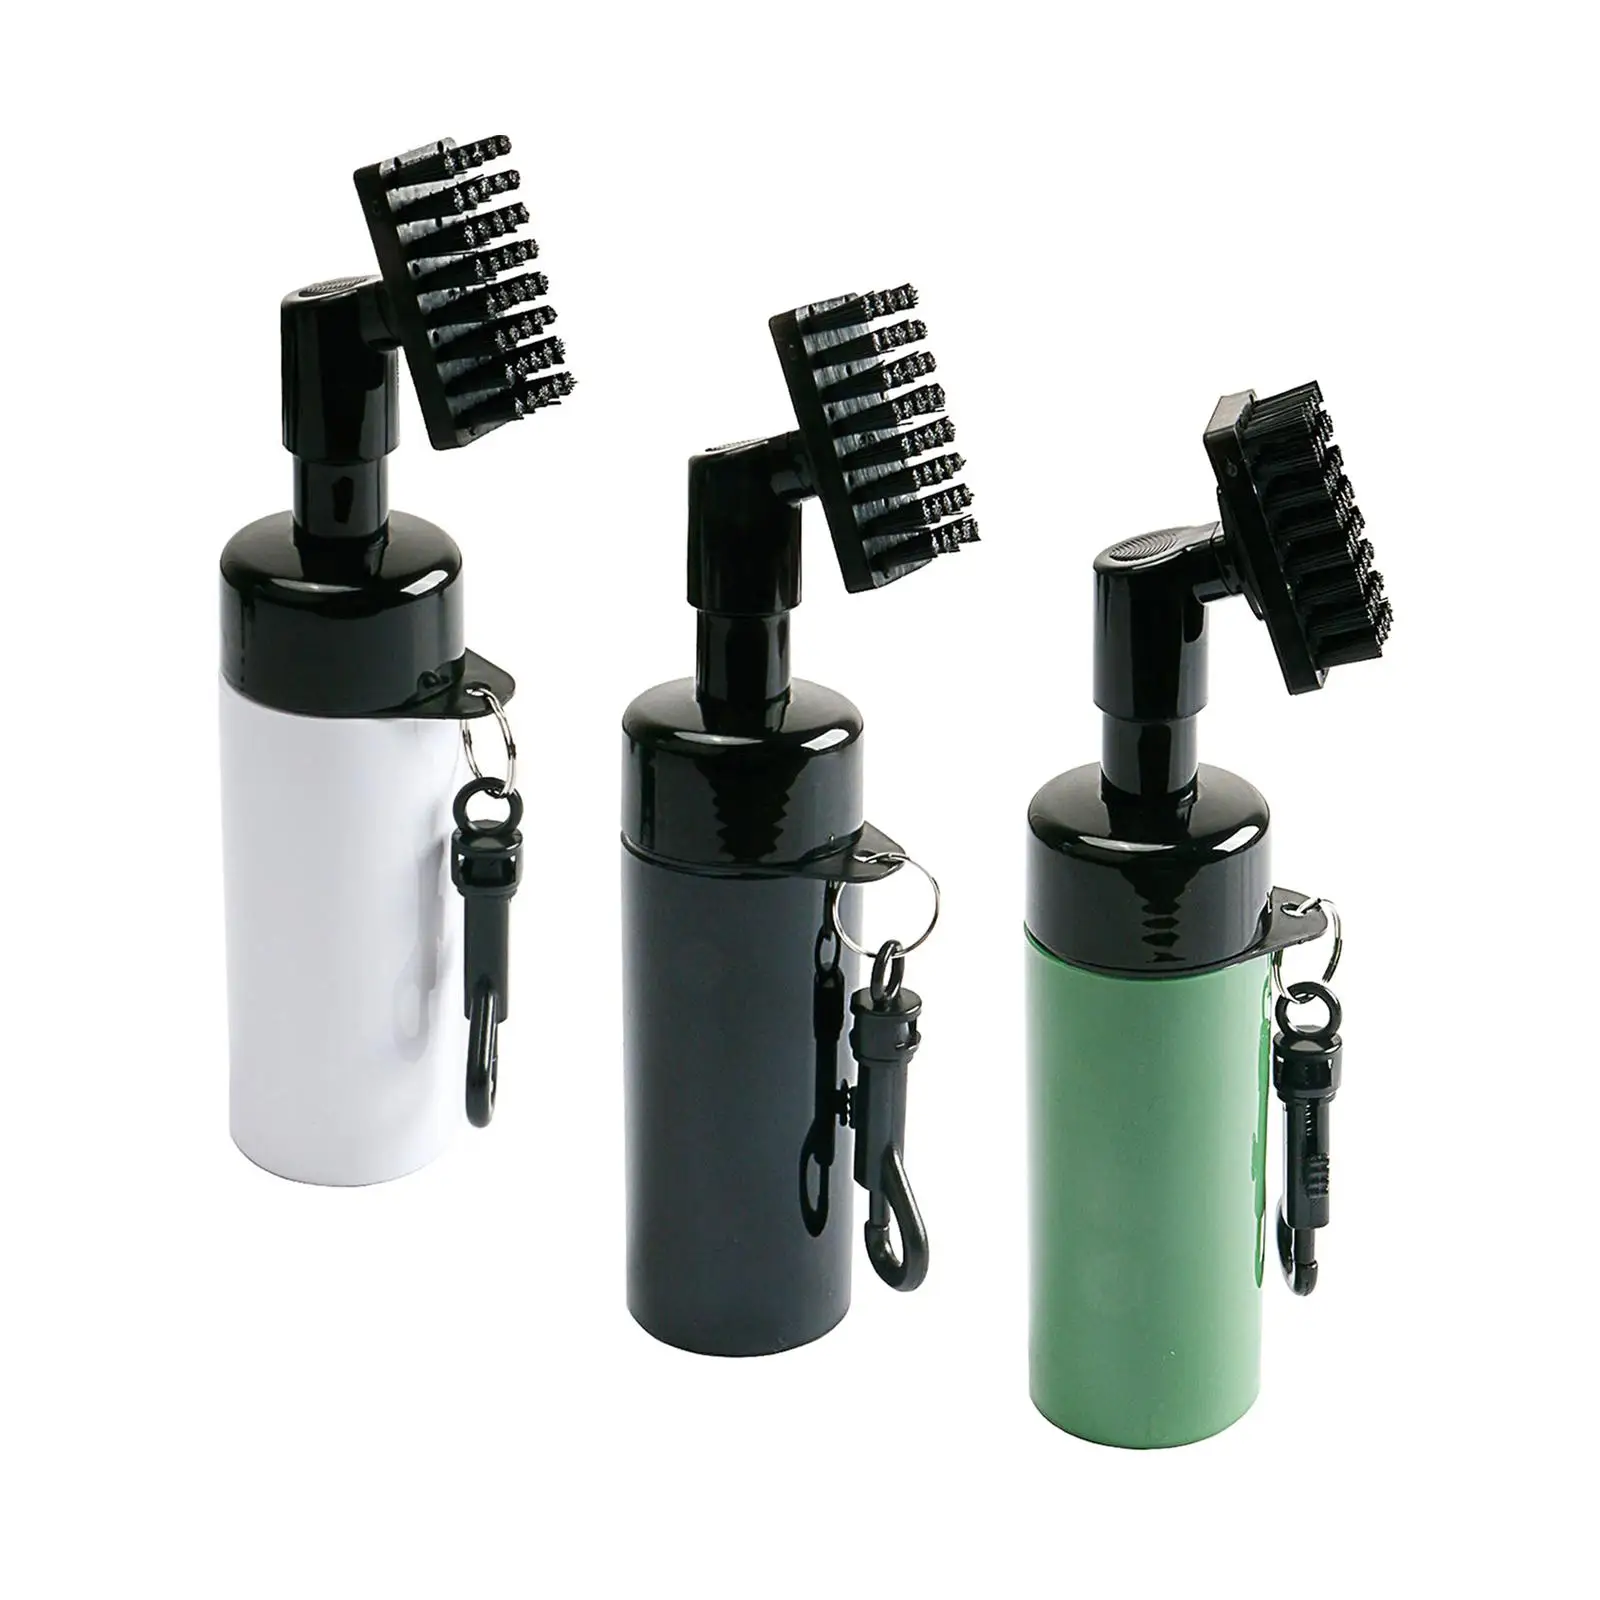 Golf Club Groove Brush with Water Storage Bottle Professional Equipment Detachable Design